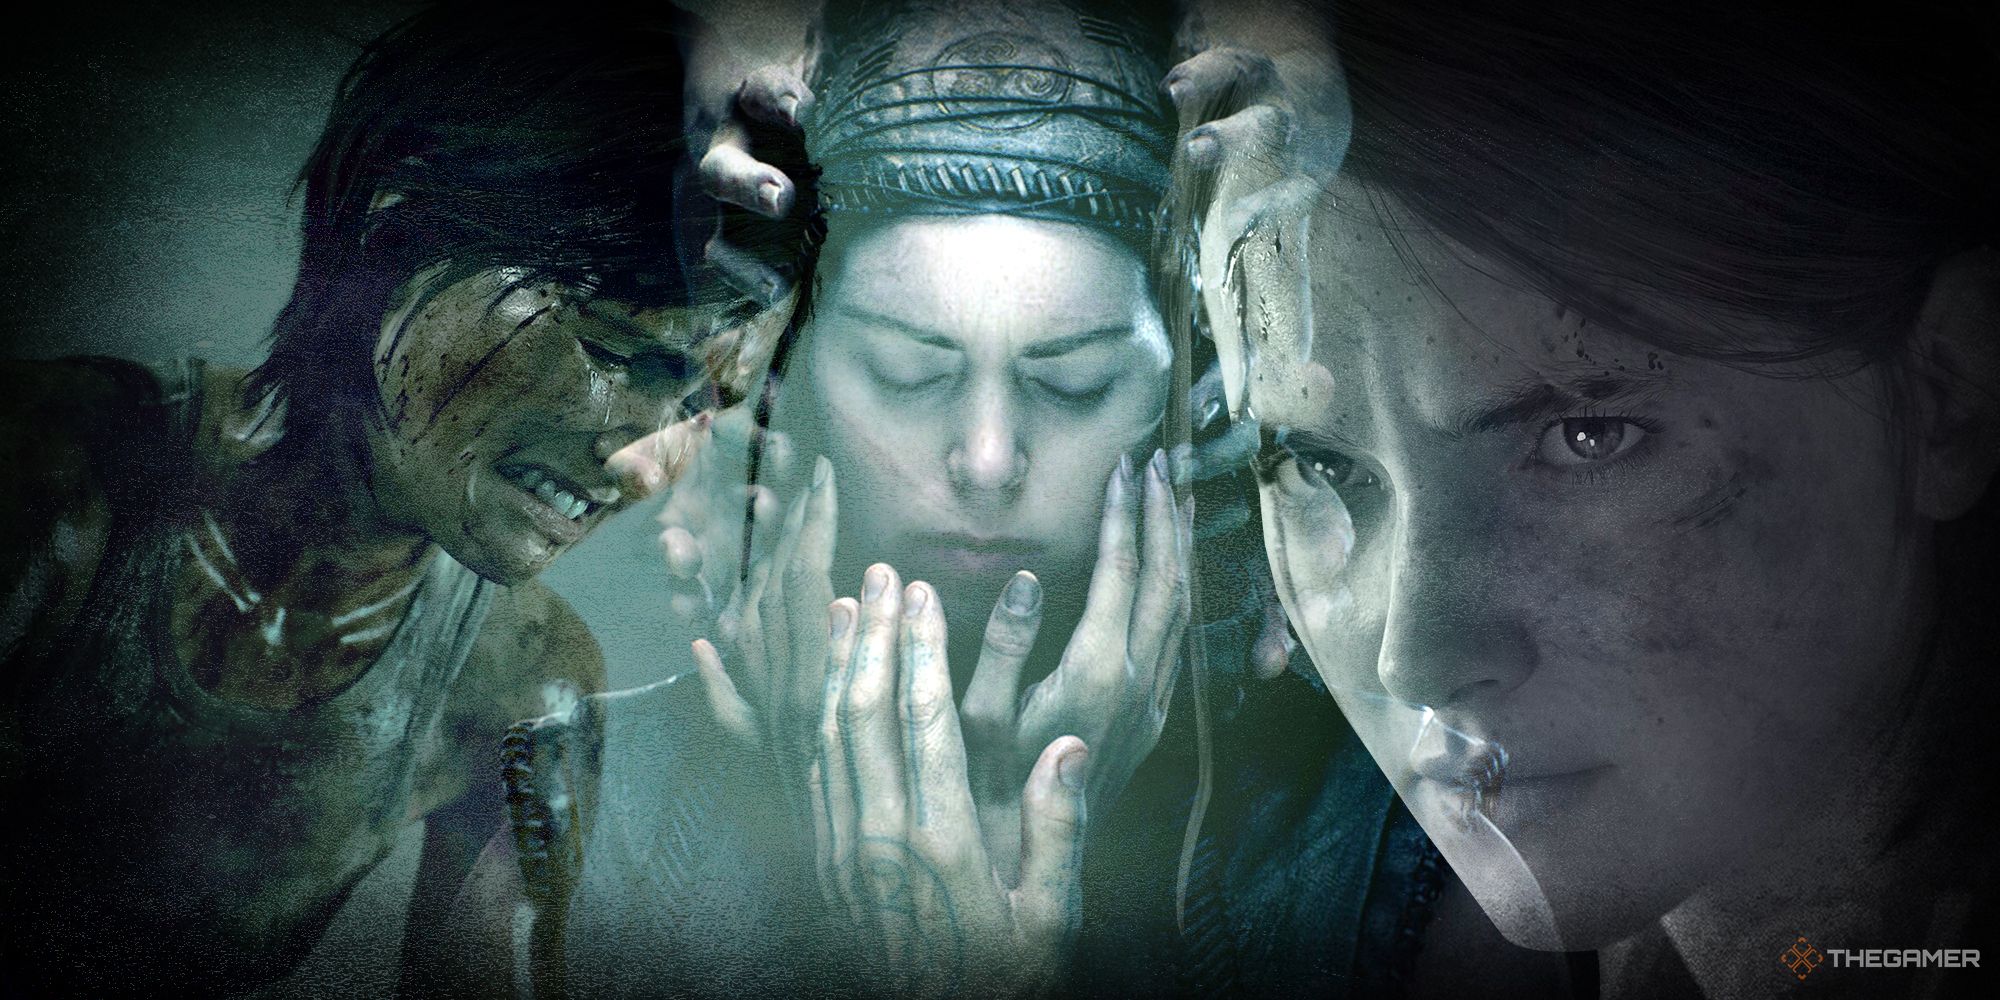 Senua in the middle with hands cradling her face, with a filthy, crying Ellie on the left and a determined Ellie on the right